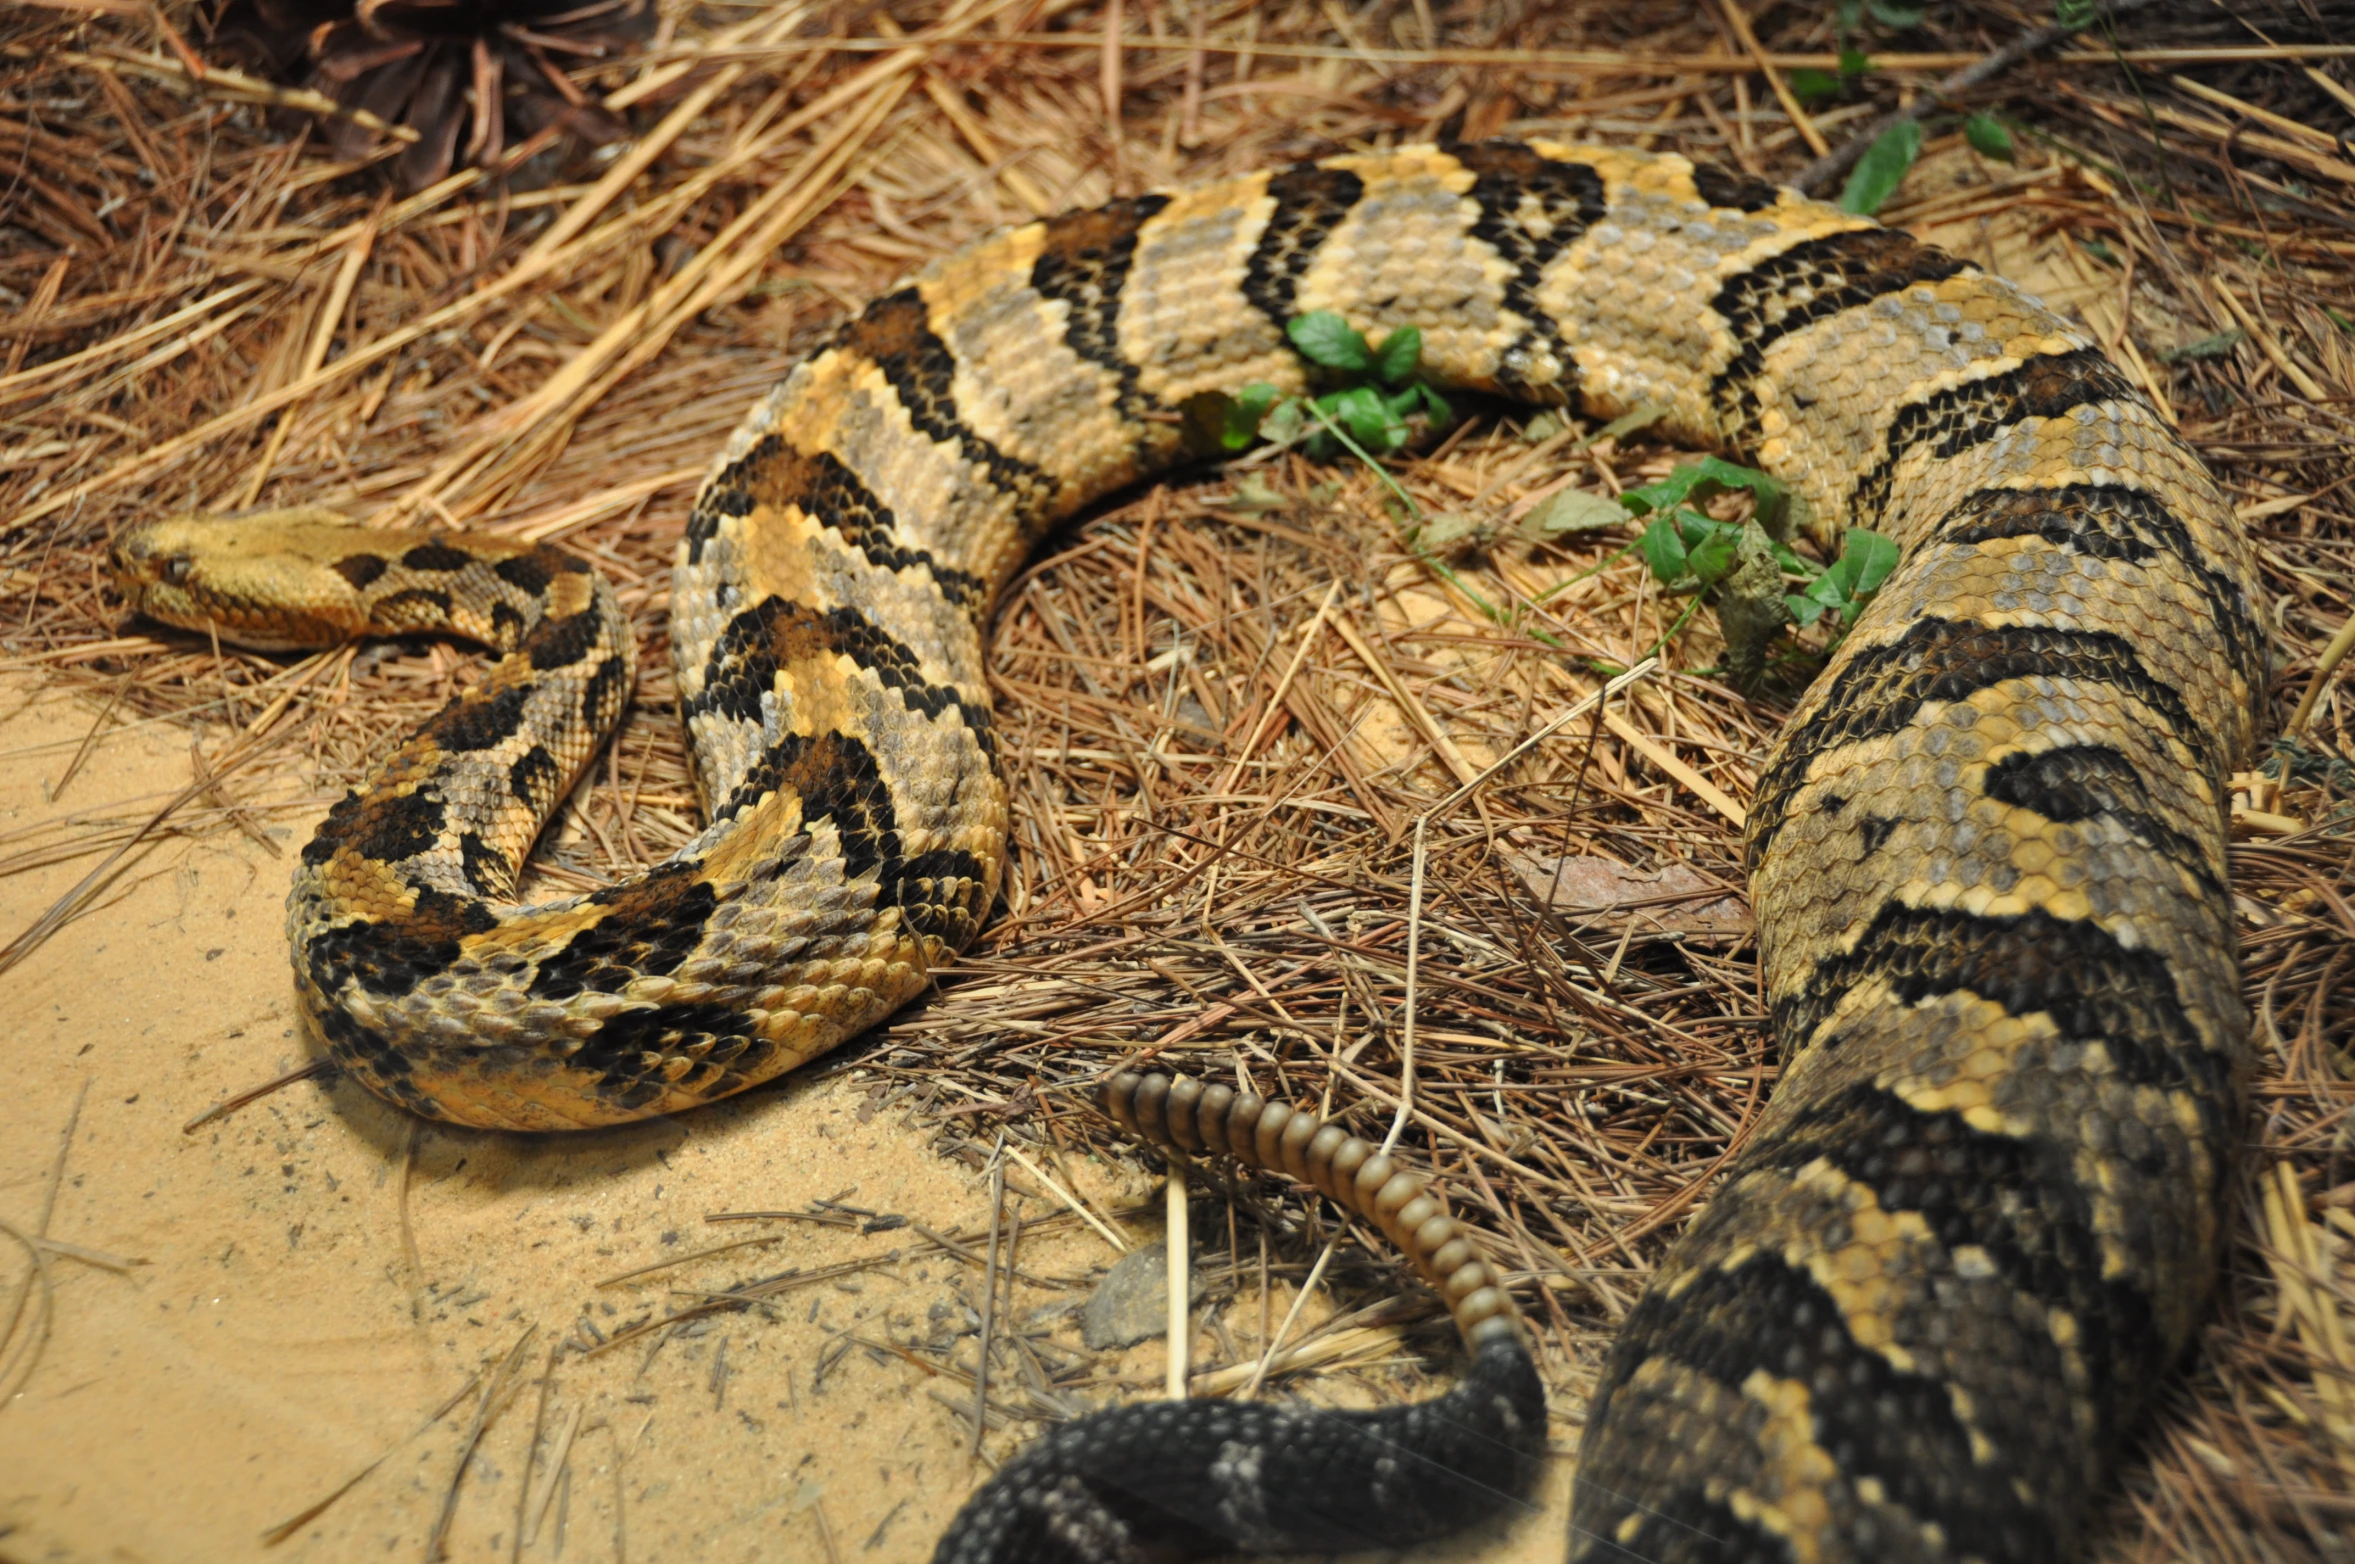 a snake is laying on the ground, with its mouth open